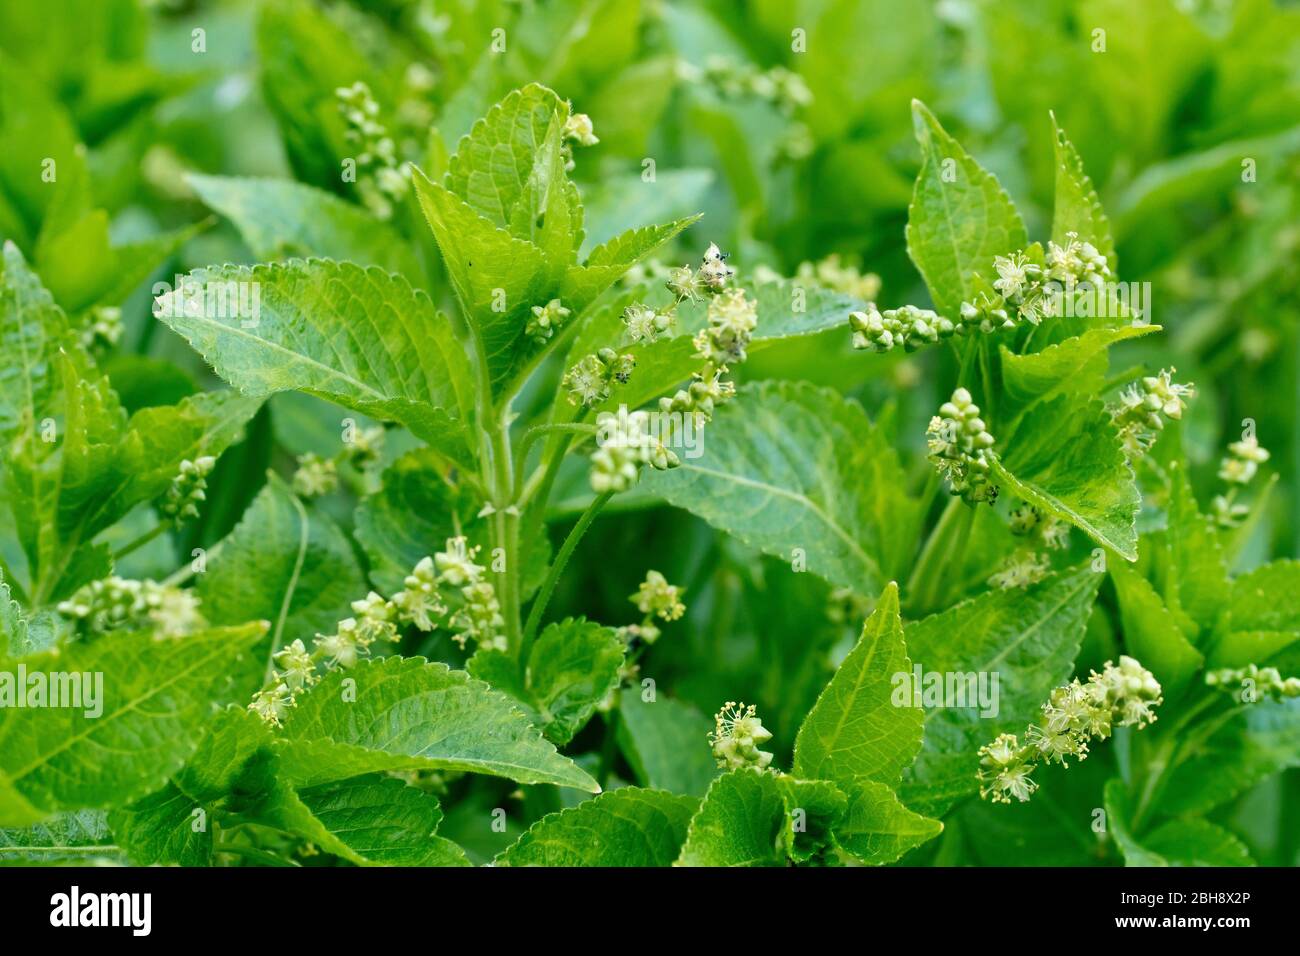 Dog's Mercury (mercurialis perennis), close up showing a cluster of the poisonous plants, each producing male flowers. Female flowers grow on separate Stock Photo